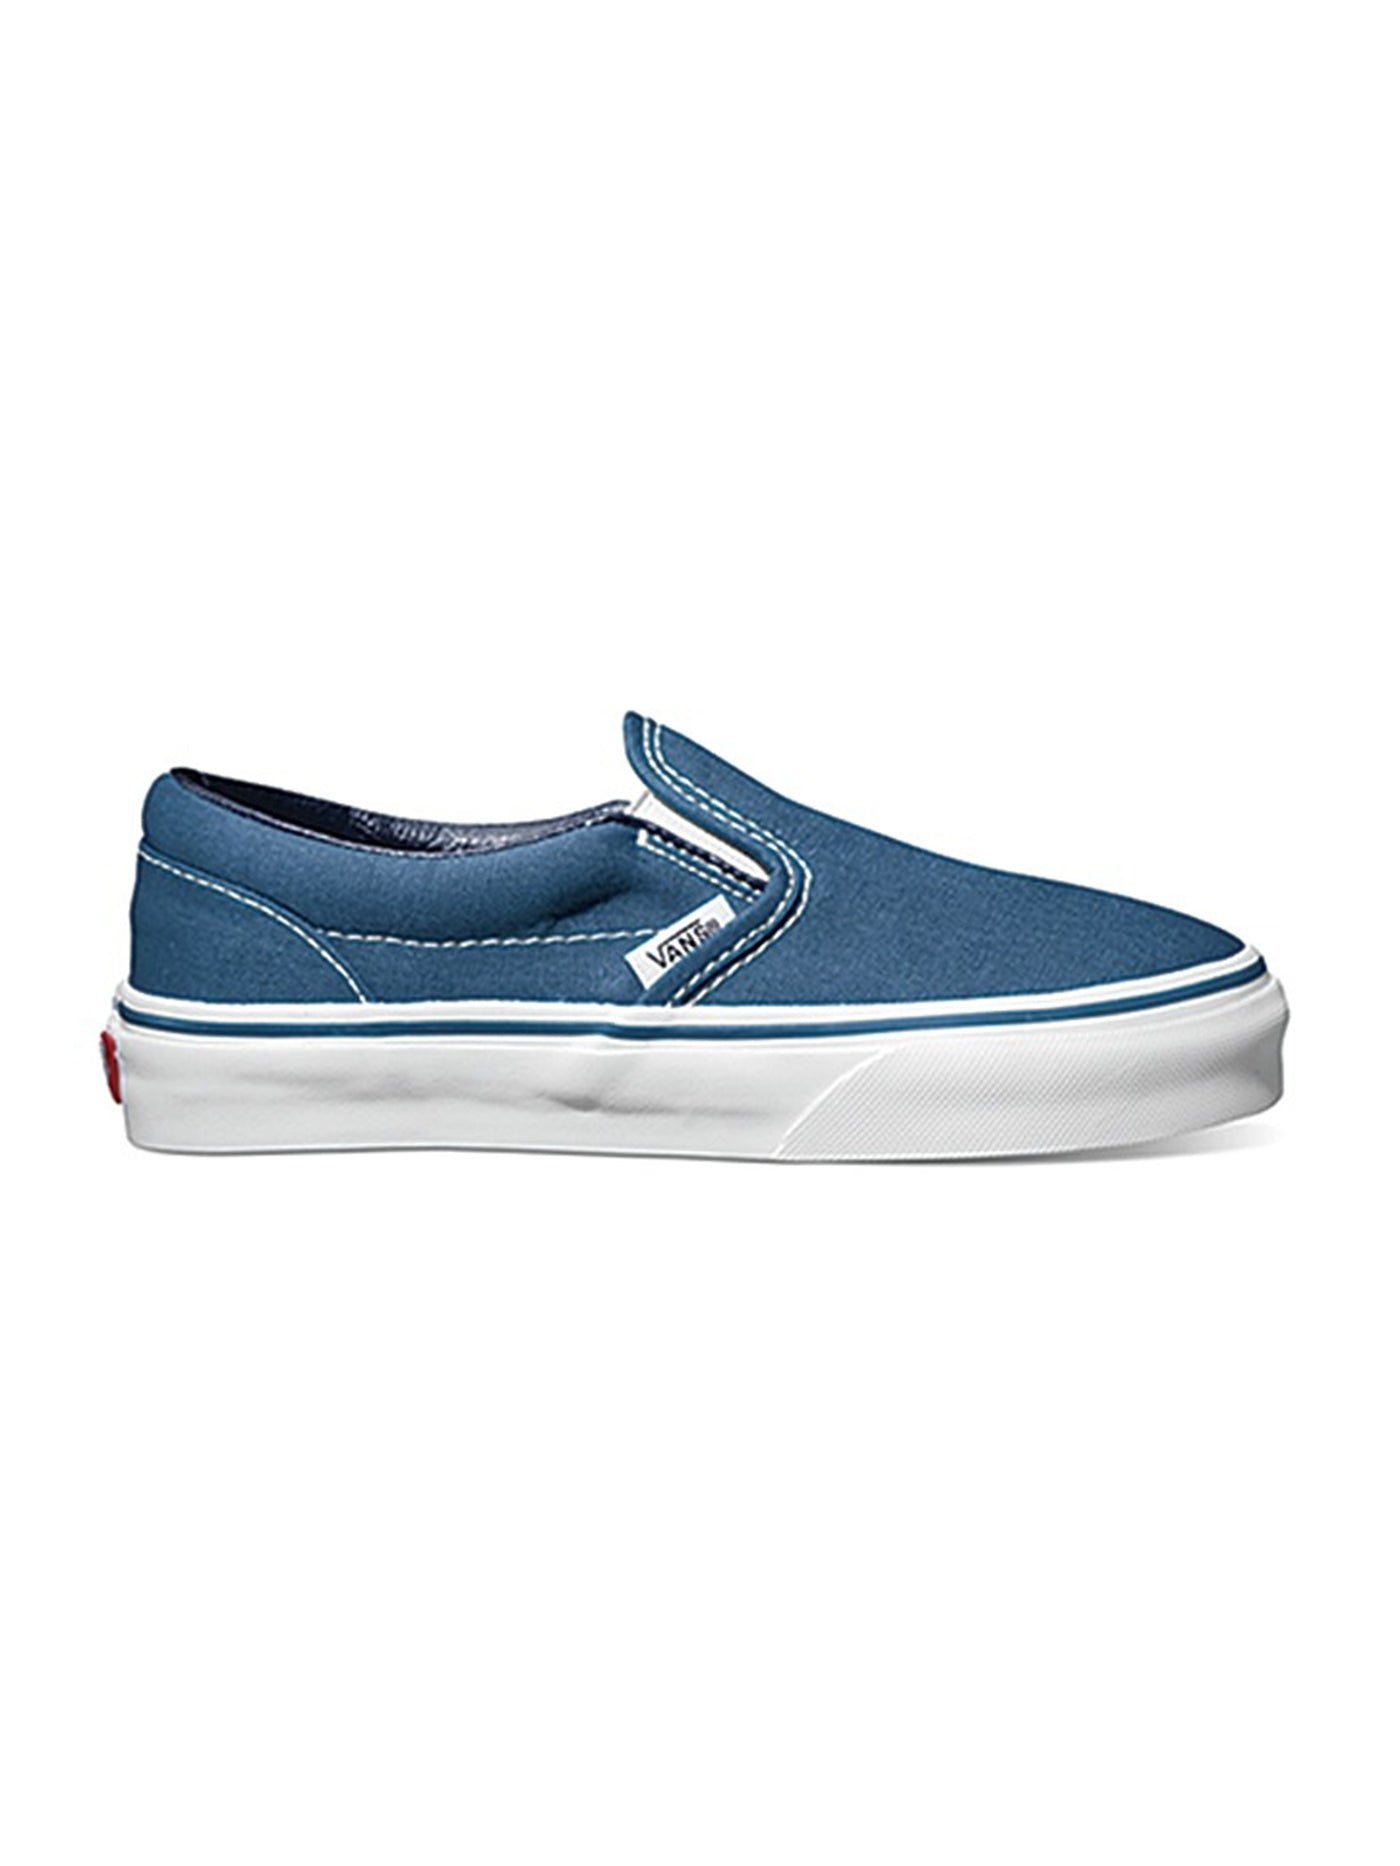 Classic Slip-On Shoes (Kids)